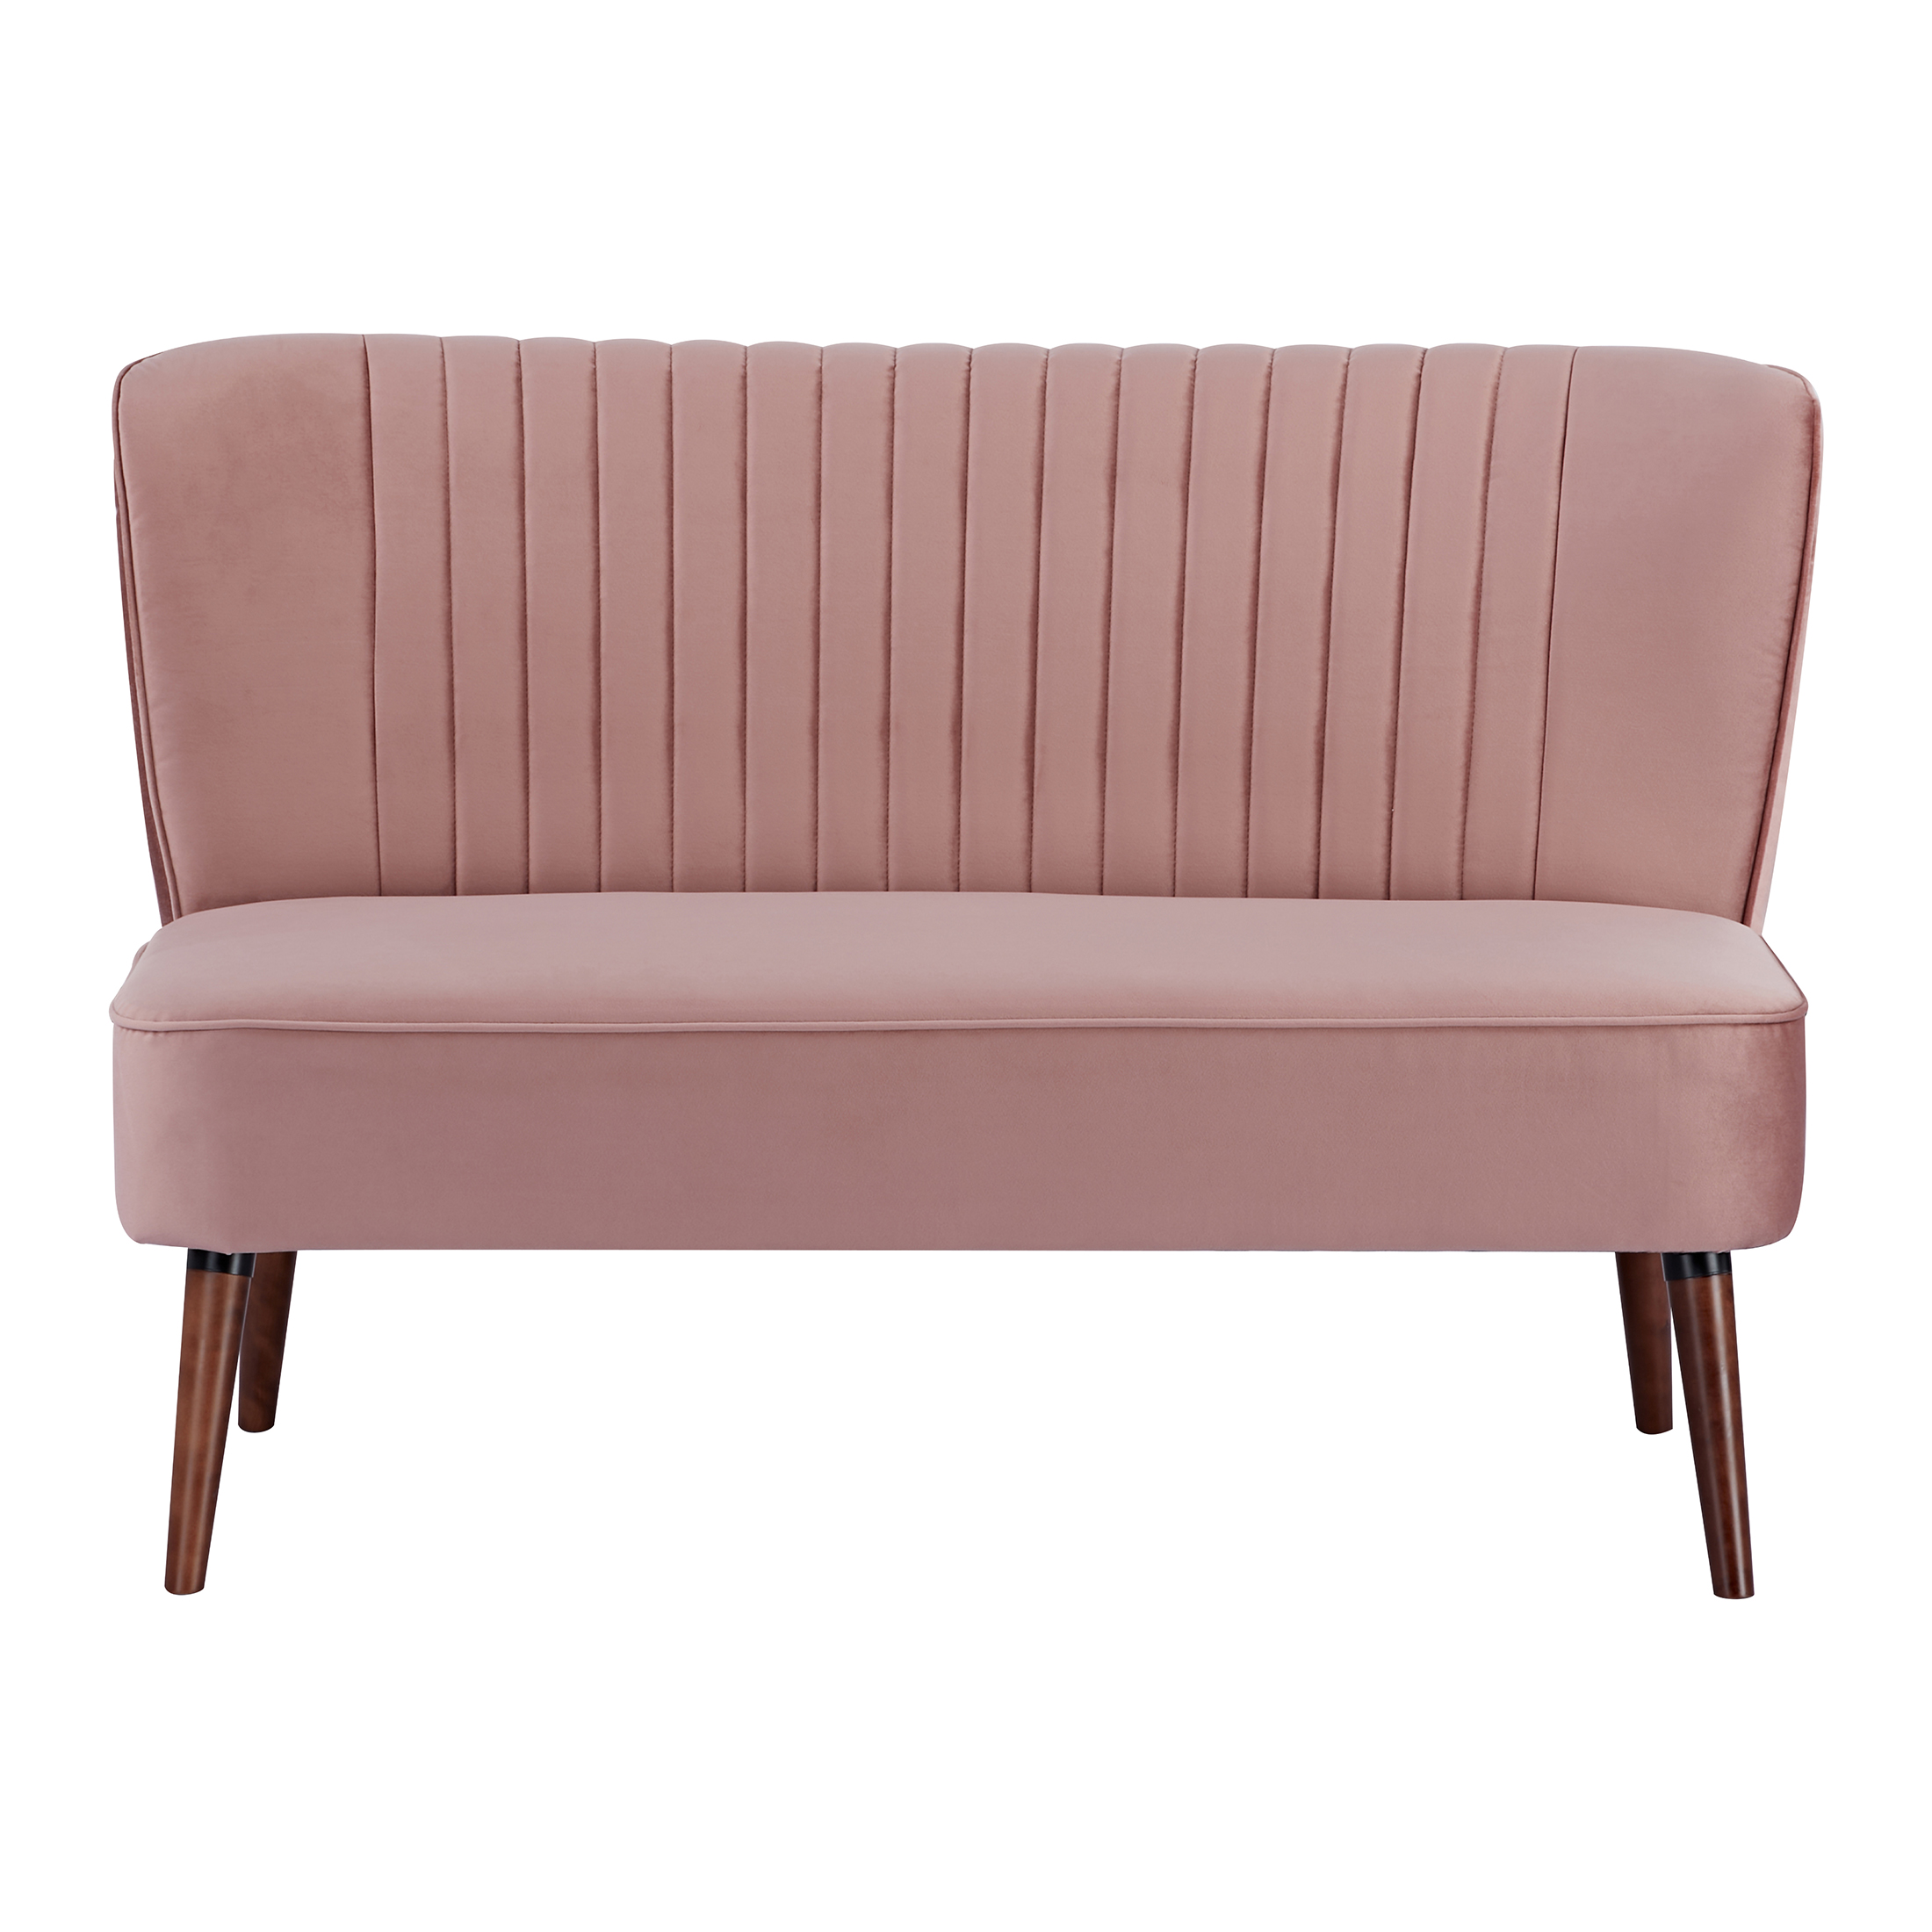 A&D Home Hollywood Mid-century Modern Velvet Tufted Loveseat, Compact 2 person Settee, Pink - image 5 of 9